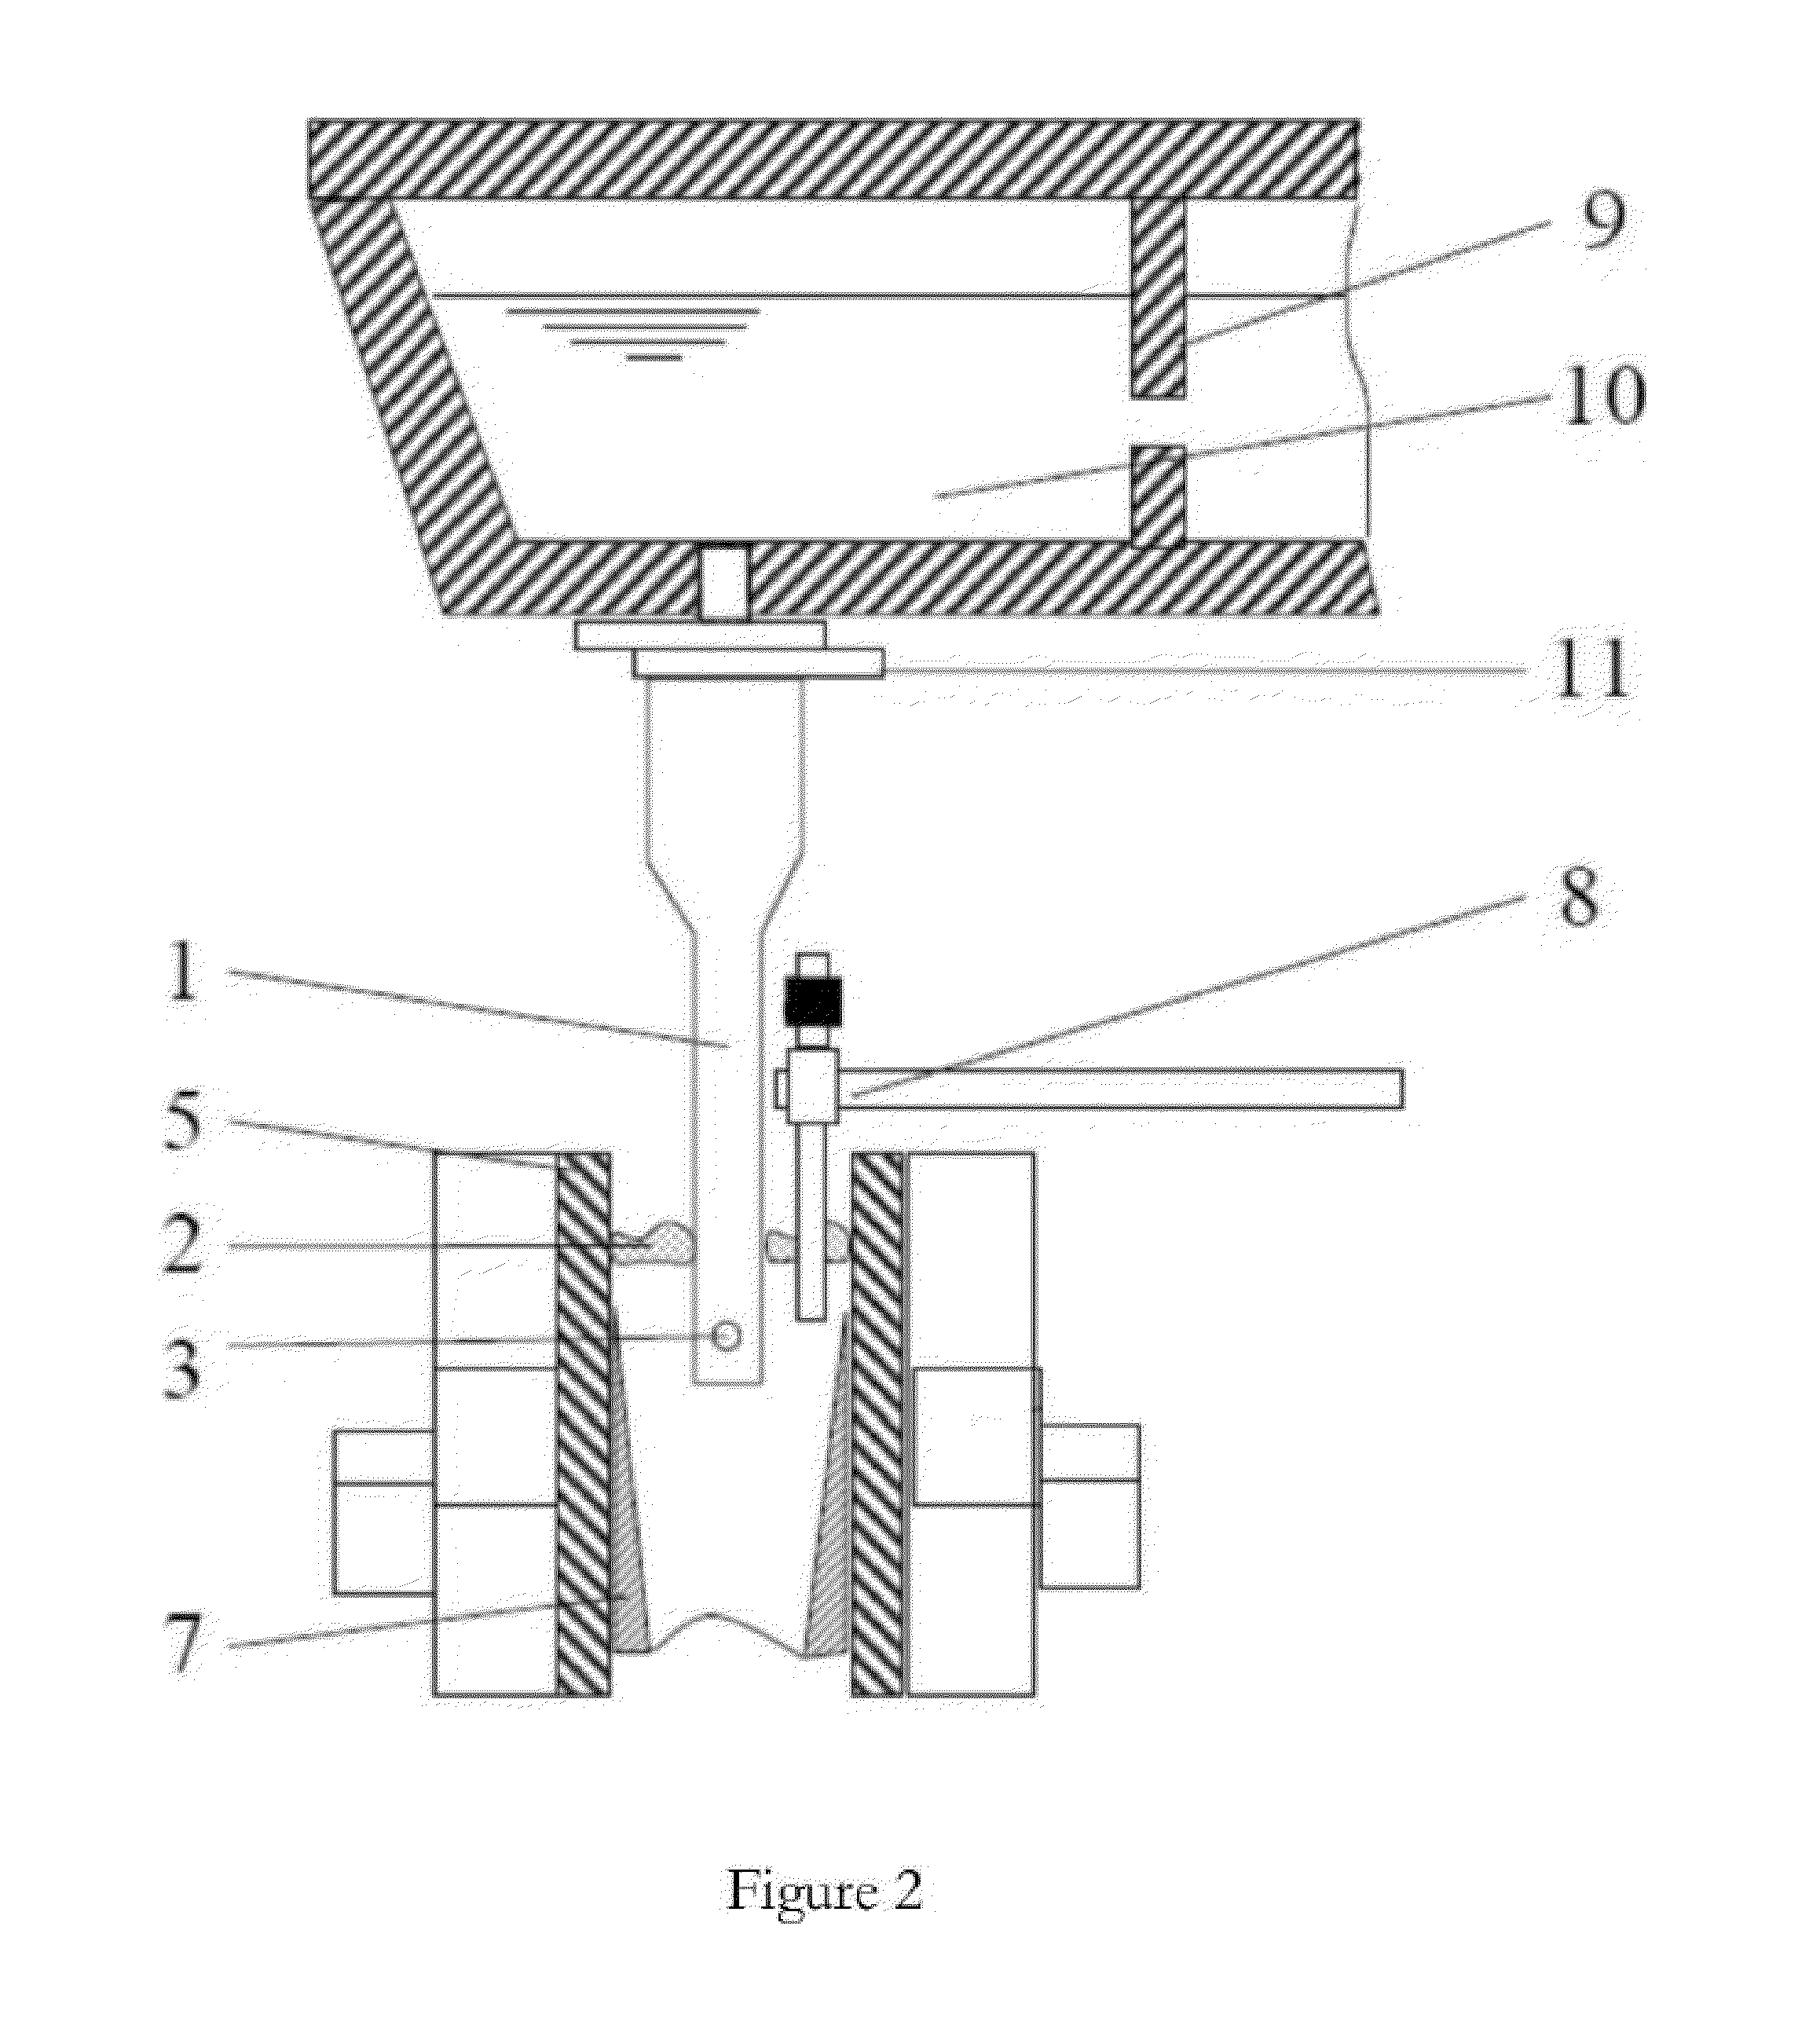 Device and method for measuring flow rate of steel melt near the surface thereof